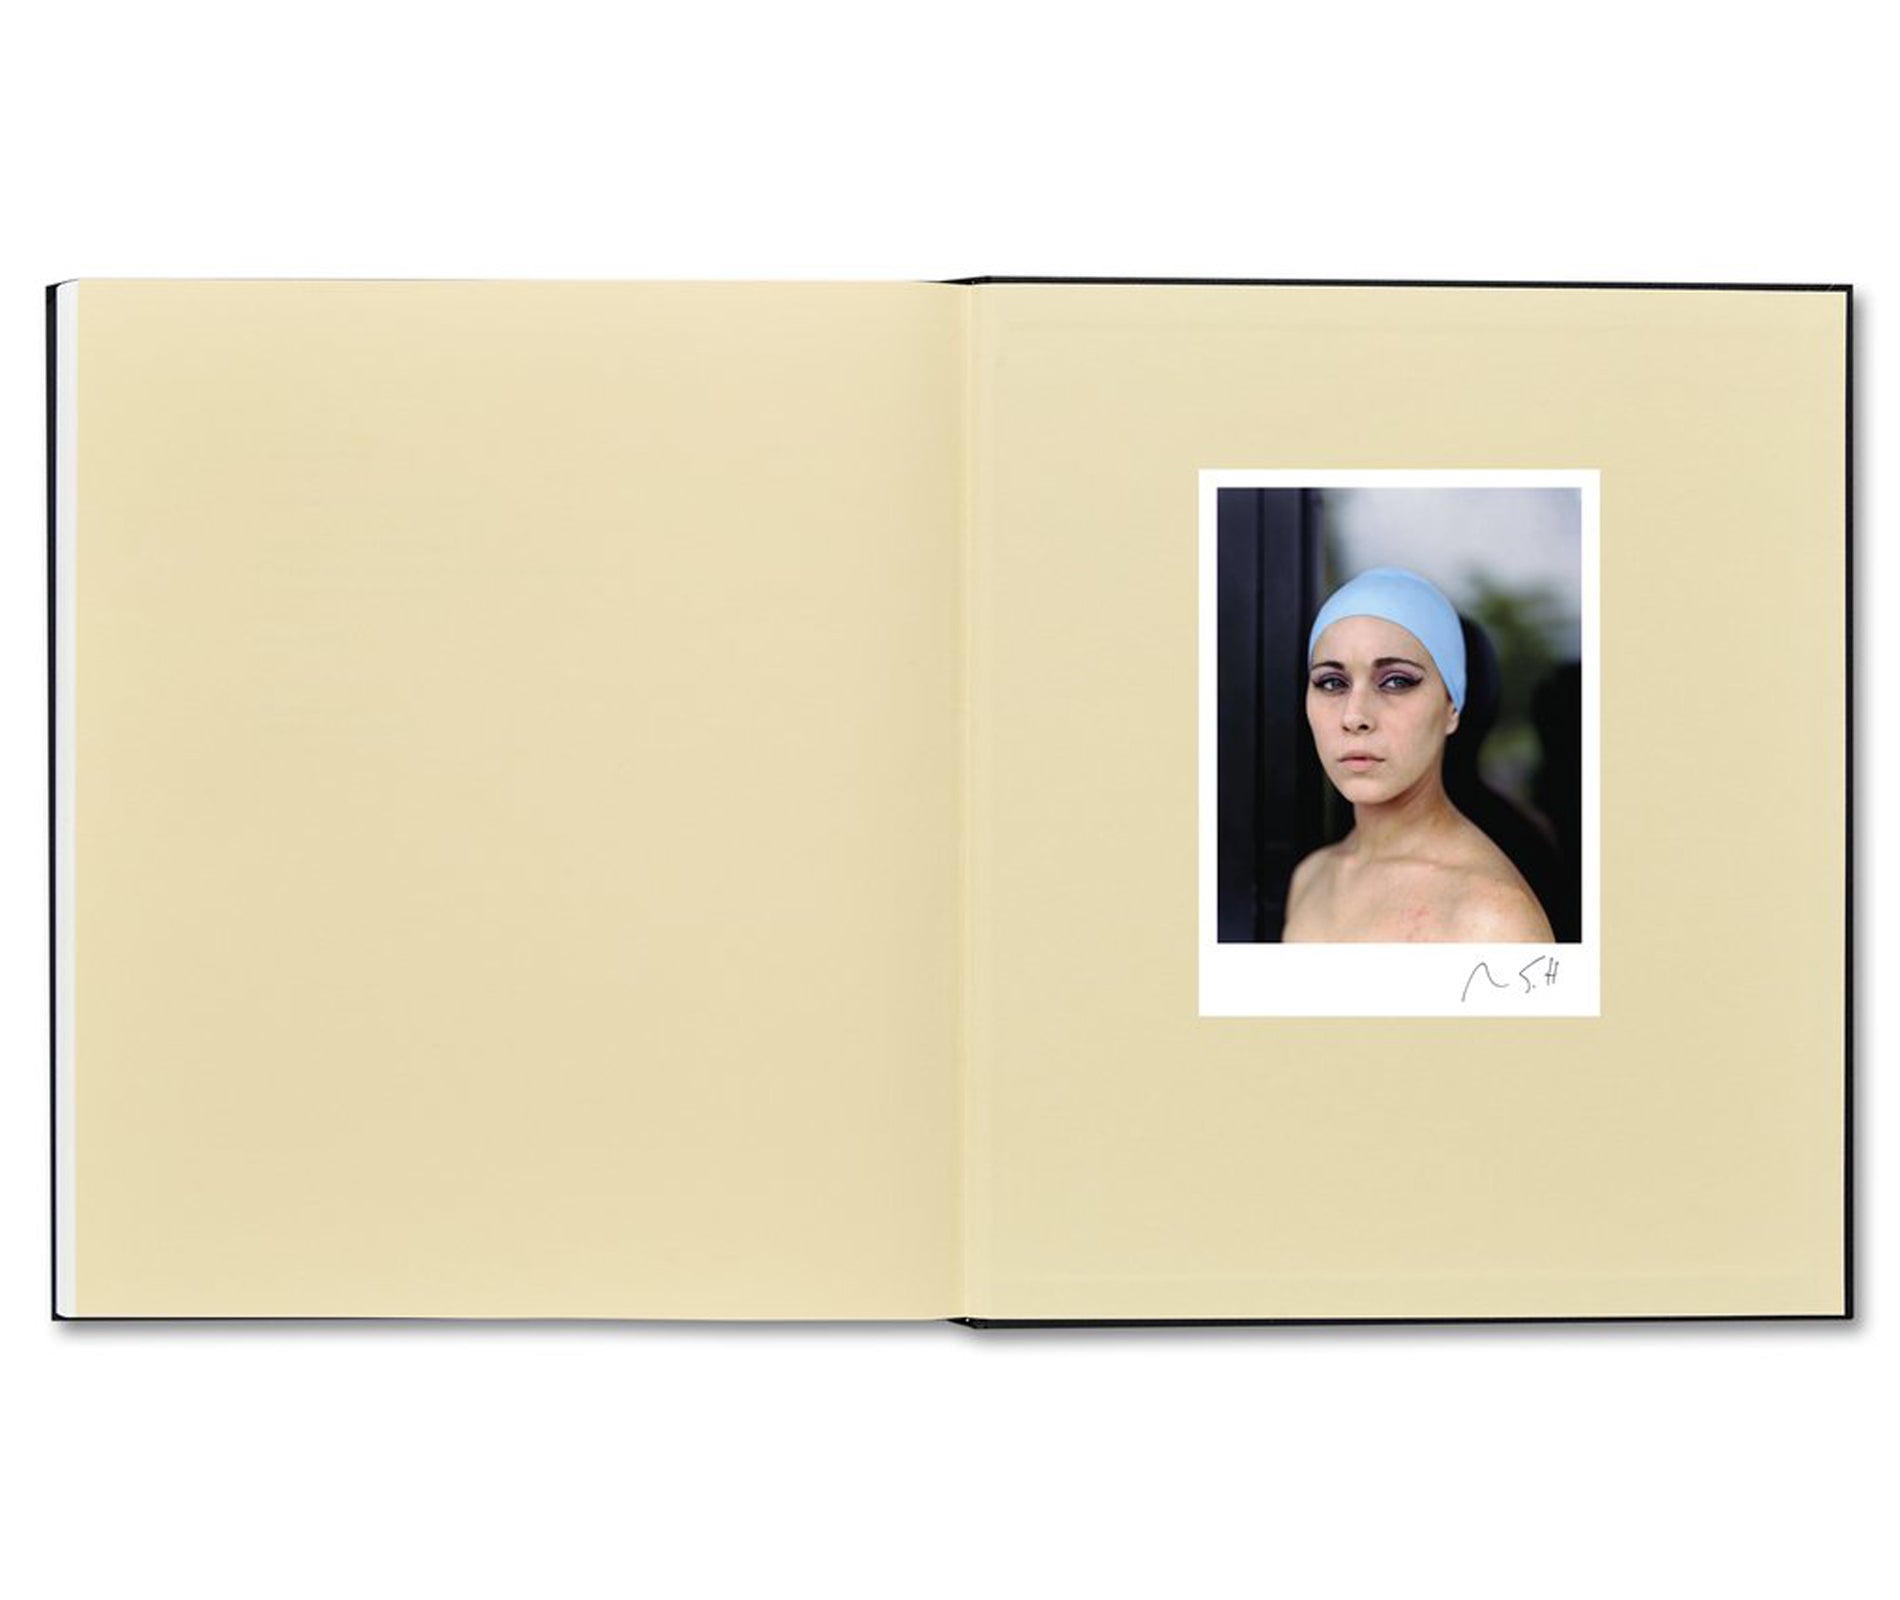 NIAGARA by Alec Soth [FIRST EDITION, SECOND PRINTING / SIGNED]